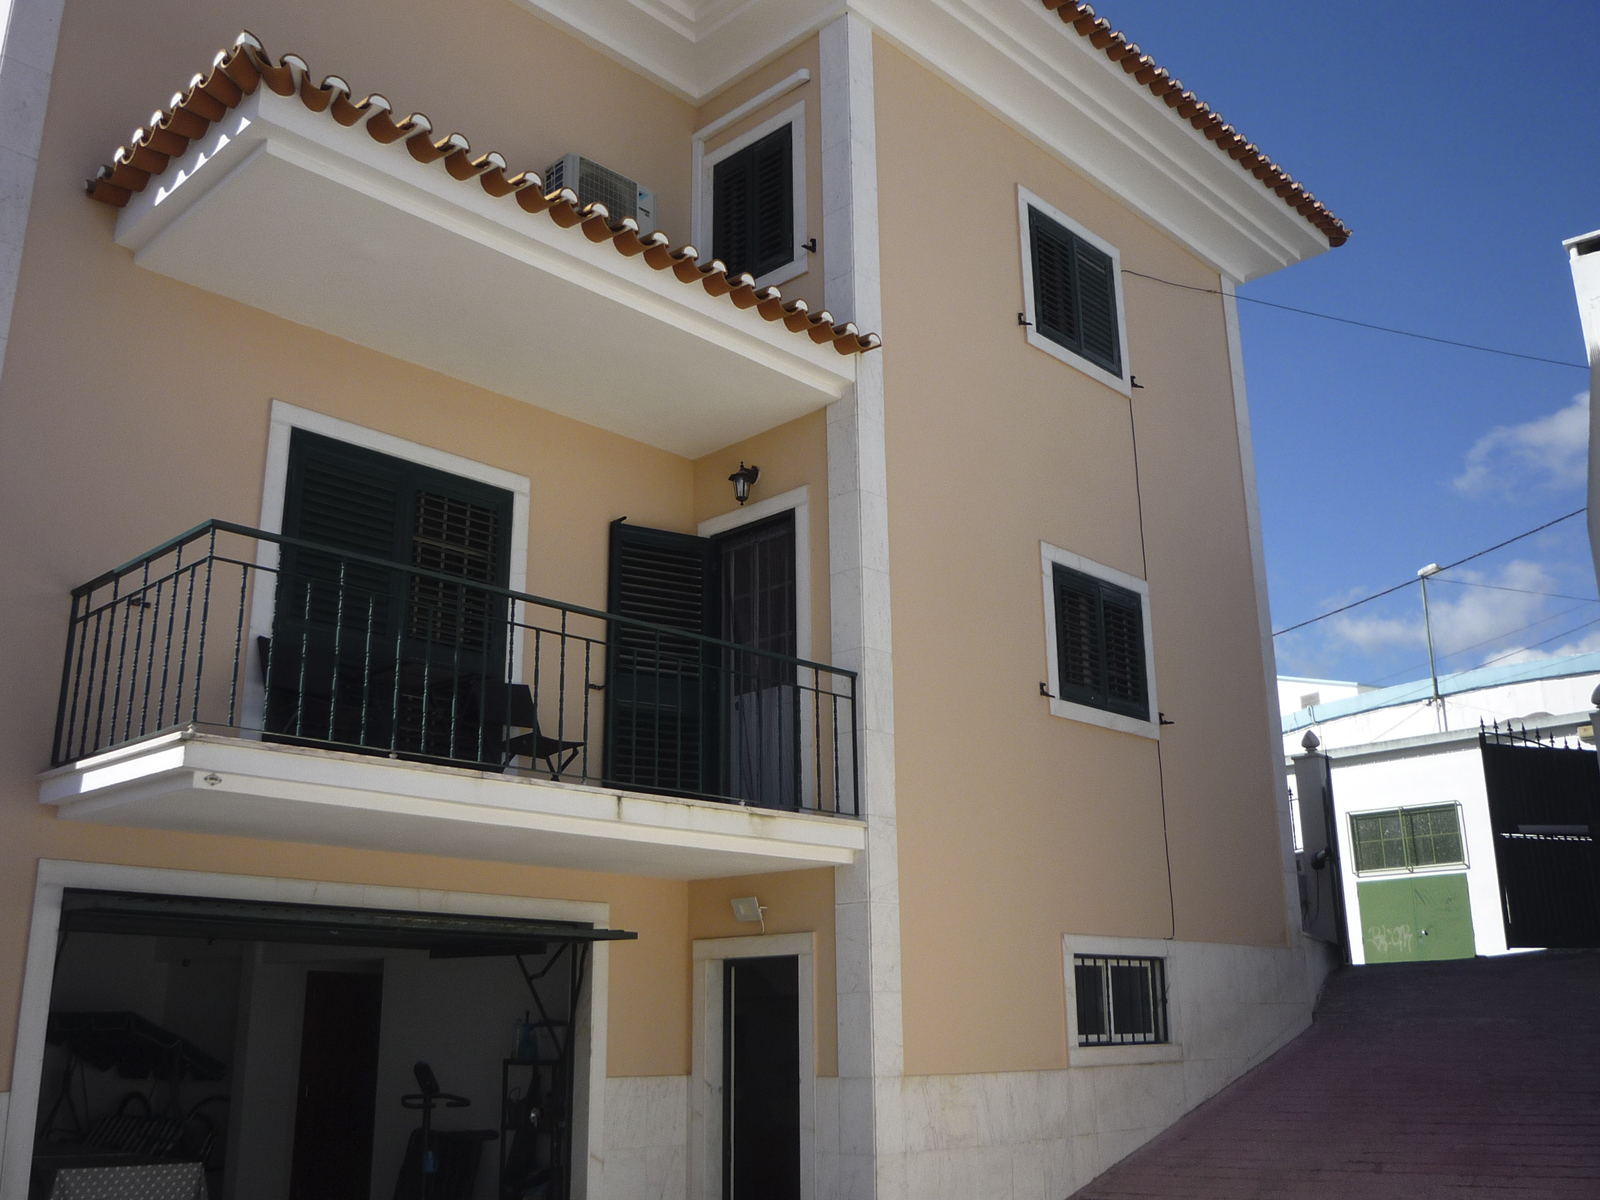 Used House in Casal da Silveira (Famões) – 206 m²